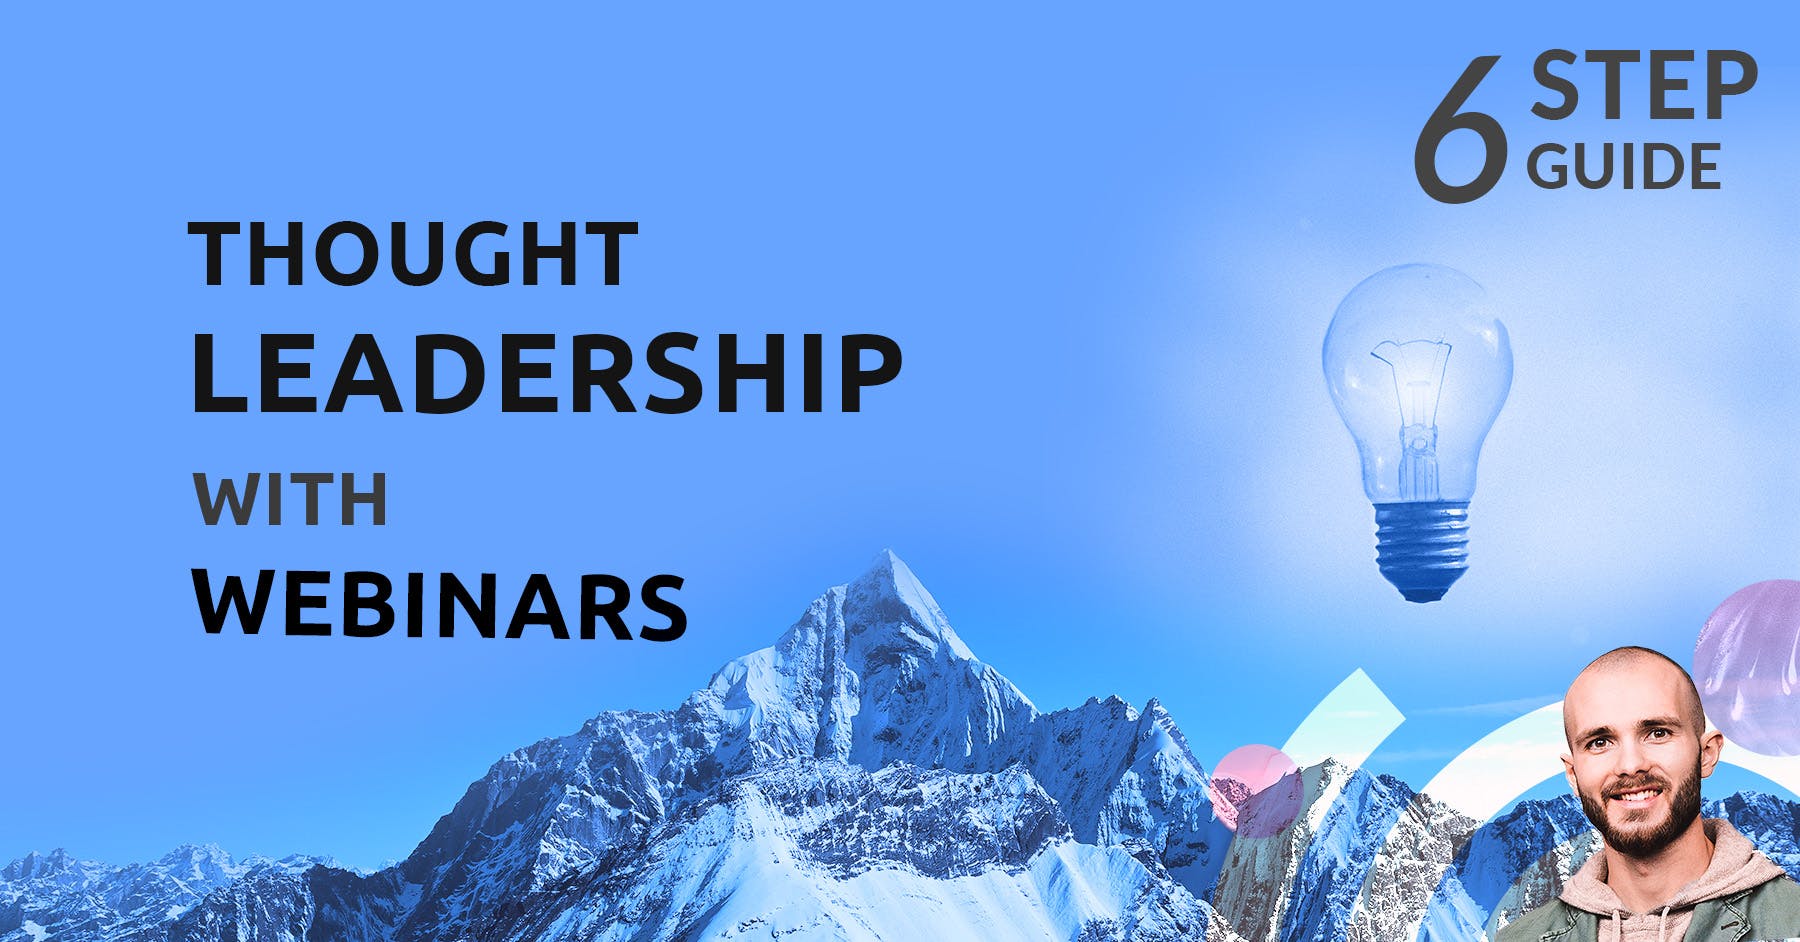 A webinar is one of the best ways to position yourself and your brand as a thought leader within your industry. You can share your expertise or host a panel of established movers and shakers in your field. In this article, we will cover how a webinar will bring your thought leadership content to life.